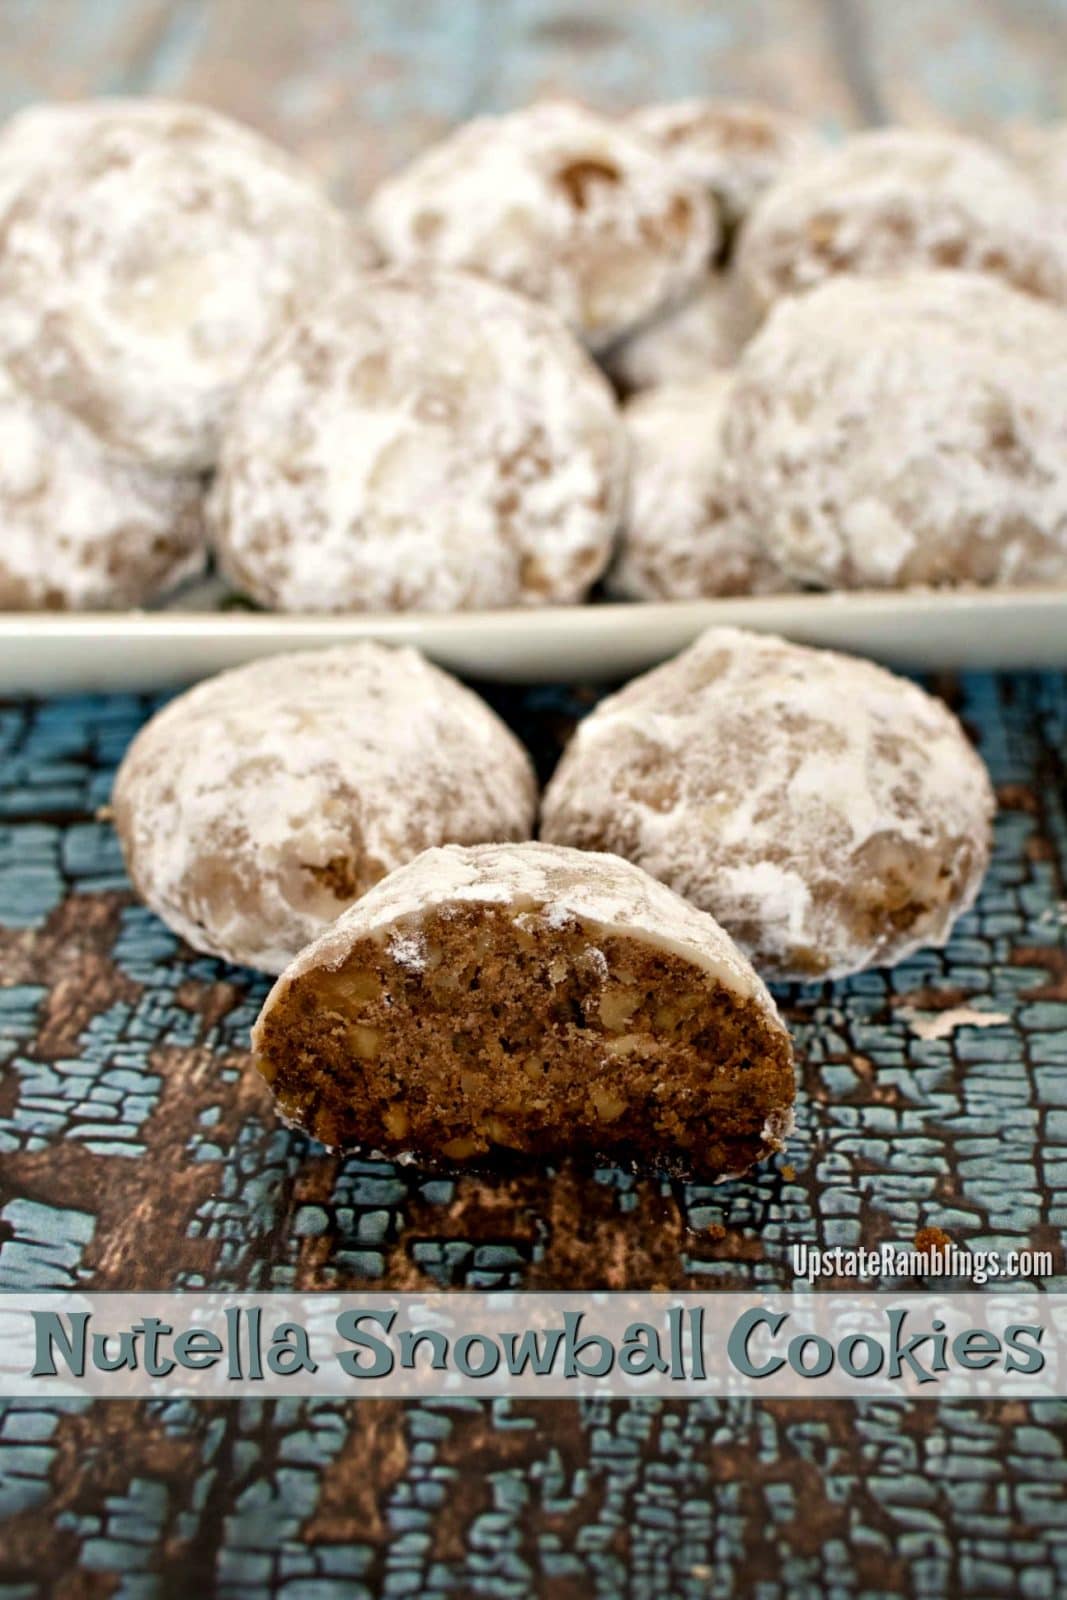 Russian tea cakes (snowball cookies) on a plate.